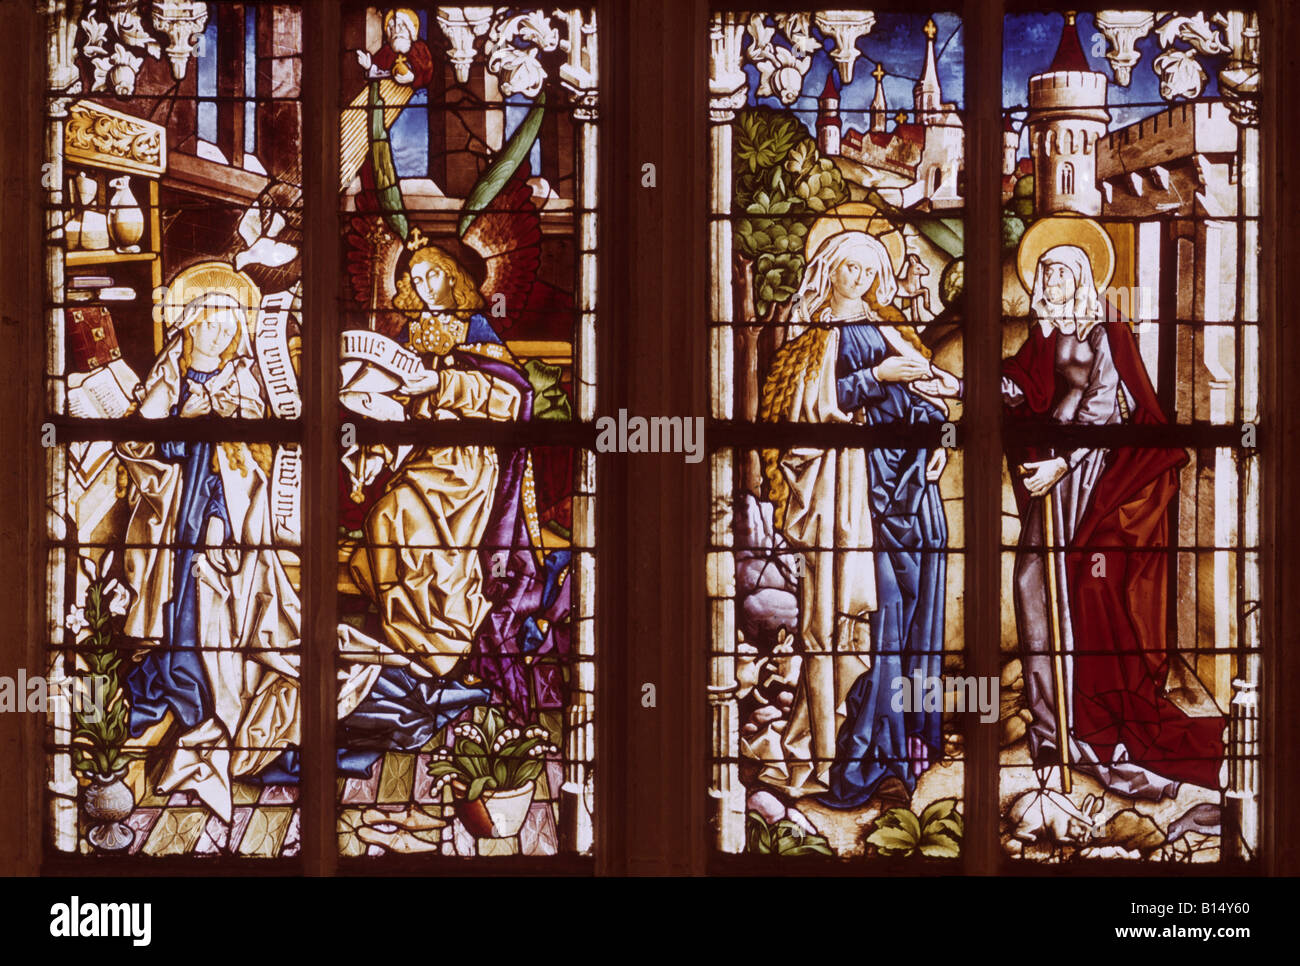 fine arts, Andlau, Peter Hemmel von (1420 - 1480), glass painting, Kramer window, Annunciation and Saint Mary with Elisabeth, Ulm Cathedral, Ulm, Germany, Artist's Copyright has not to be cleared Stock Photo